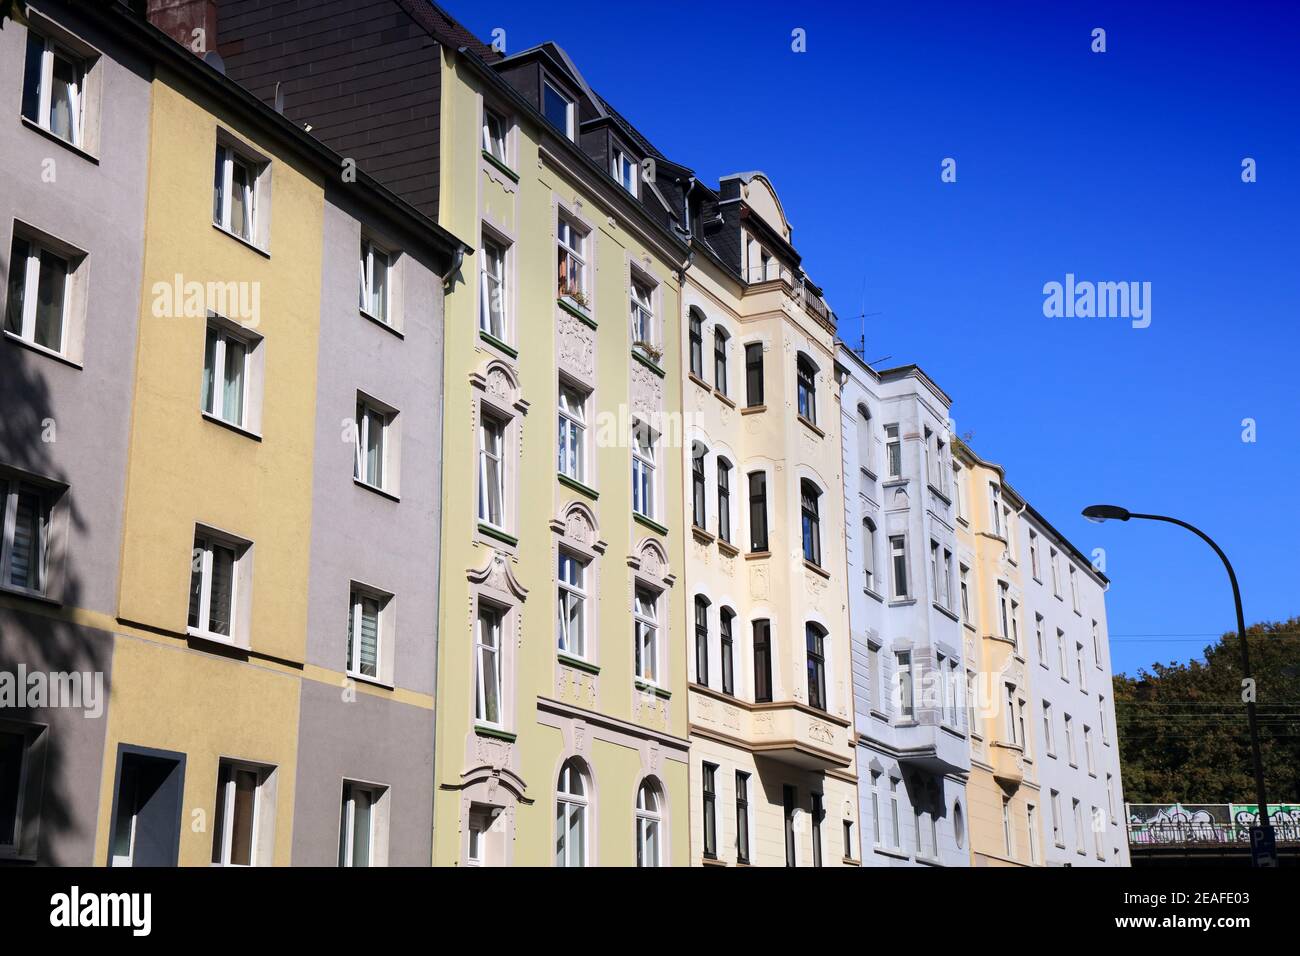 Bochum city in Germany. Residential street view. Stock Photo